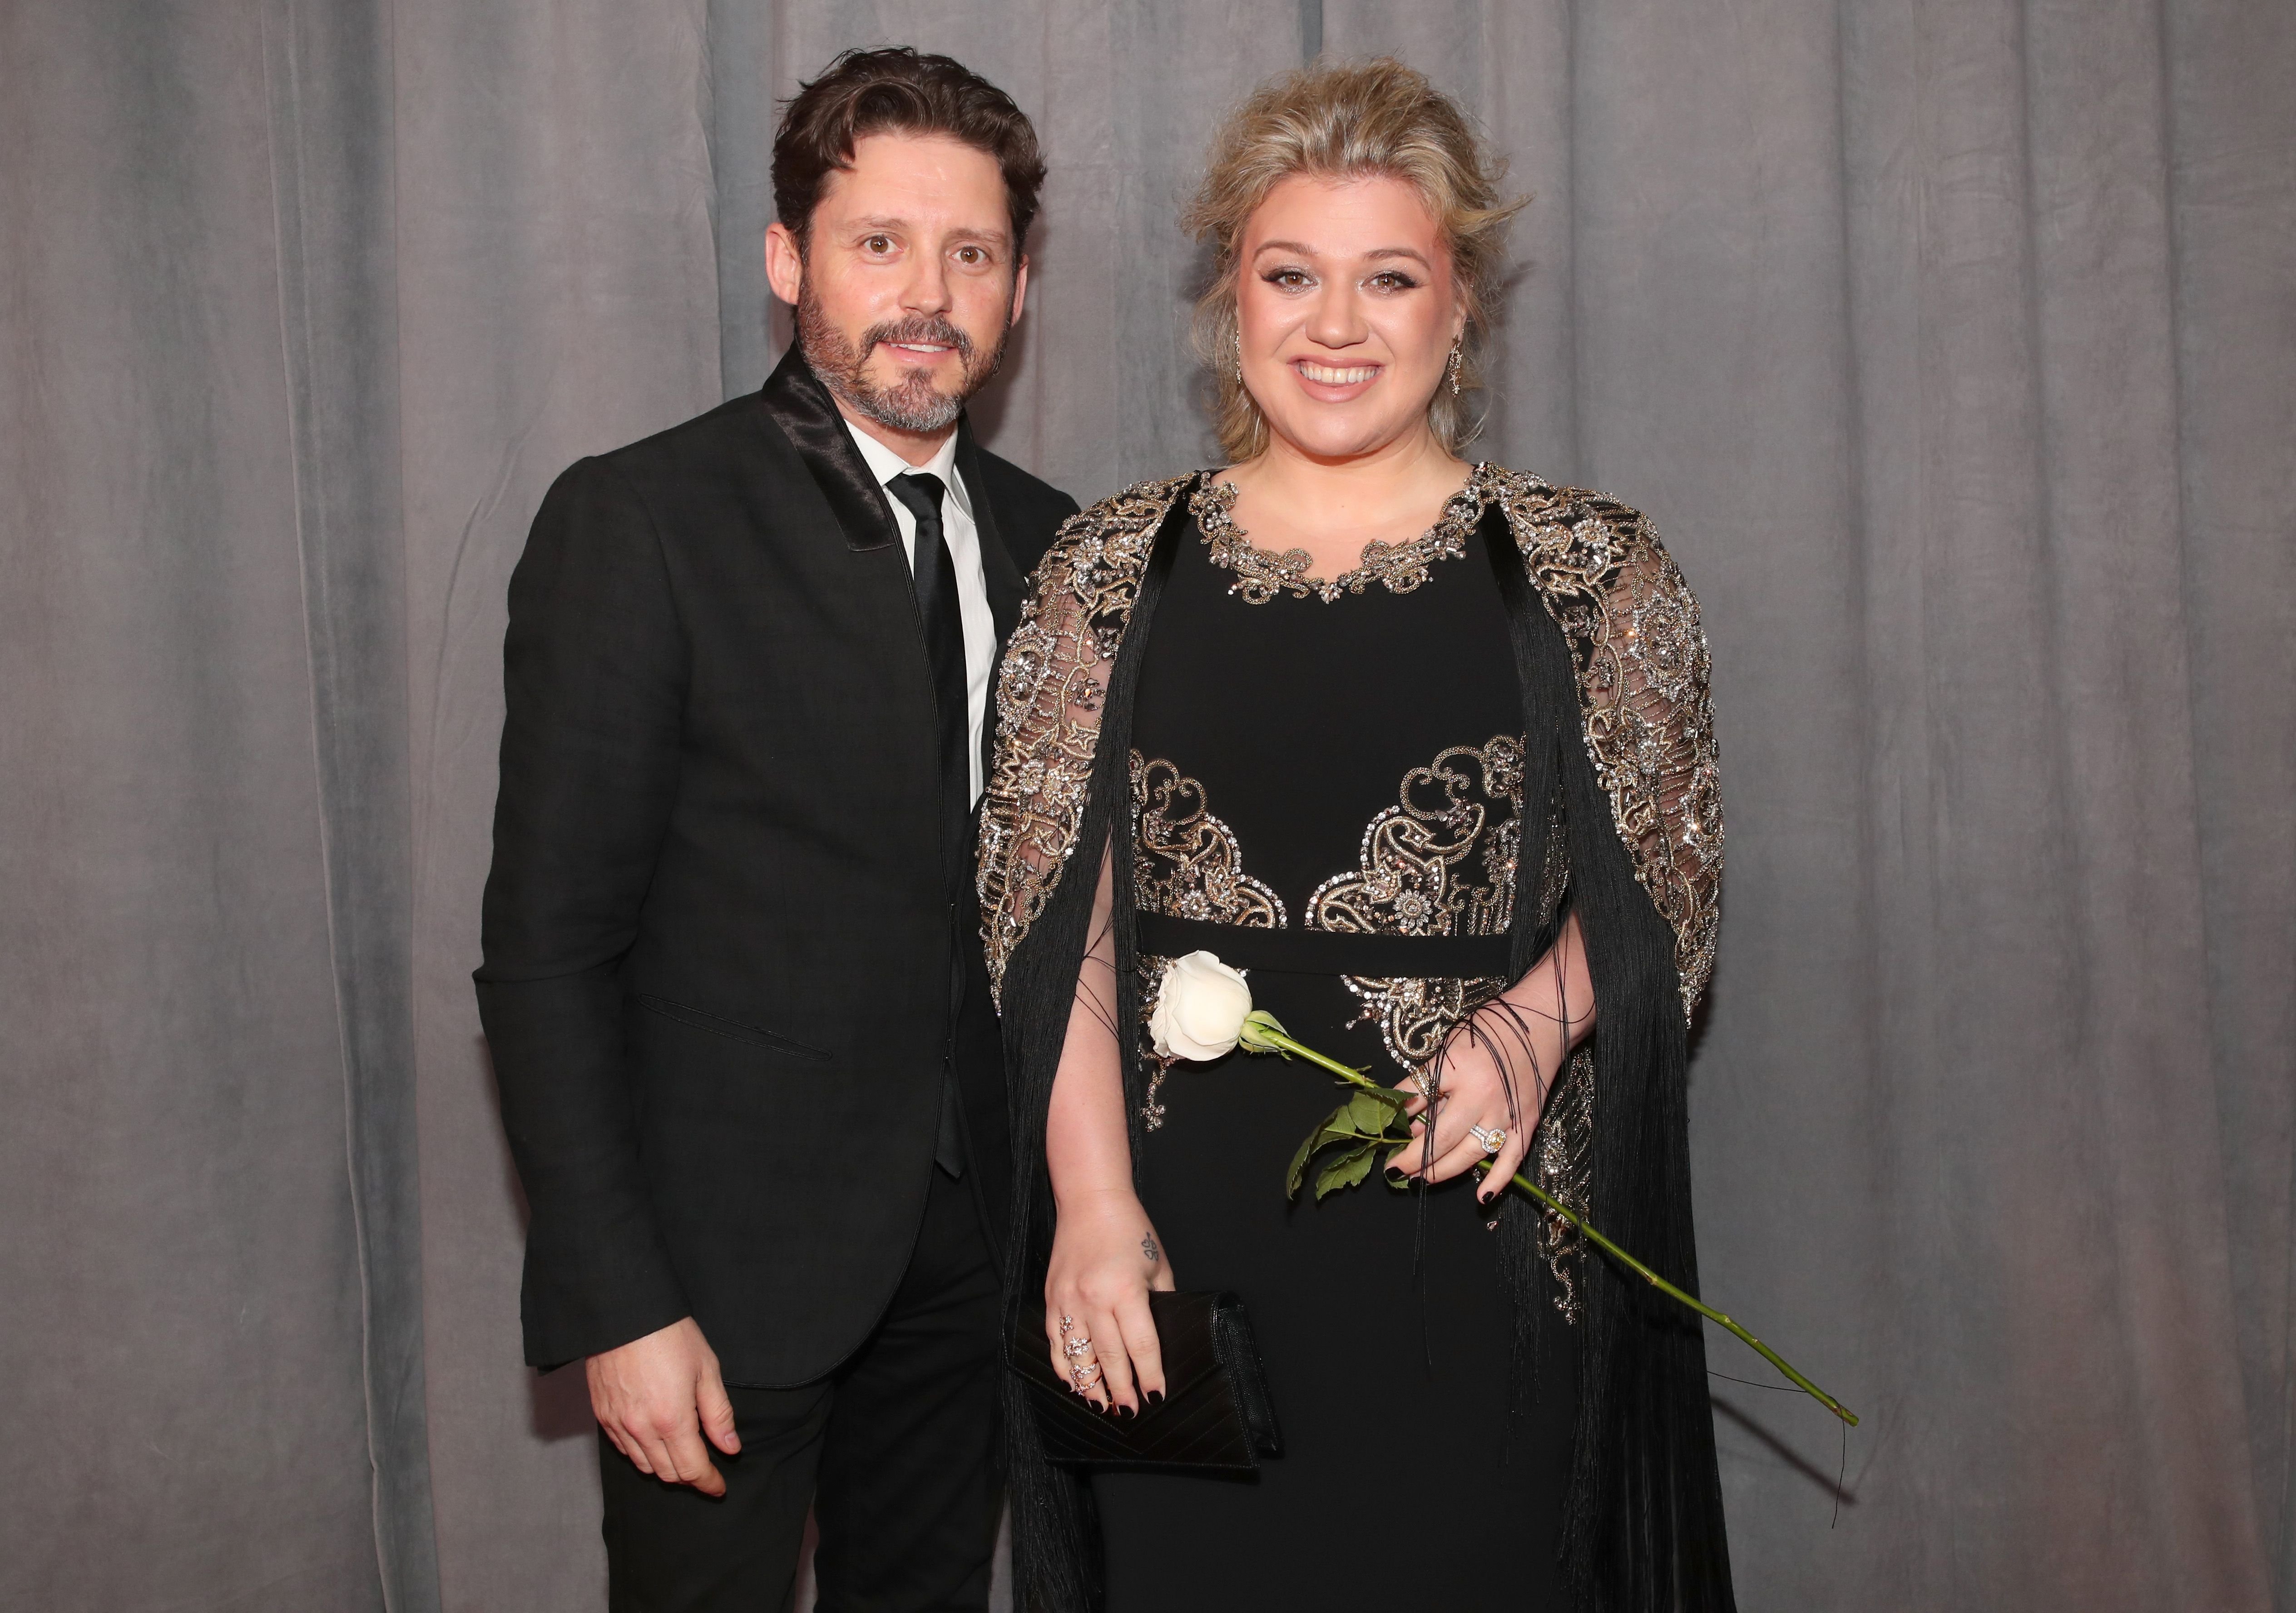 Brandon Blackstock and Kelly Clarkson at the 60th Annual GRAMMY Awards at Madison Square Garden on January 28, 2018. | Photo: Getty Images